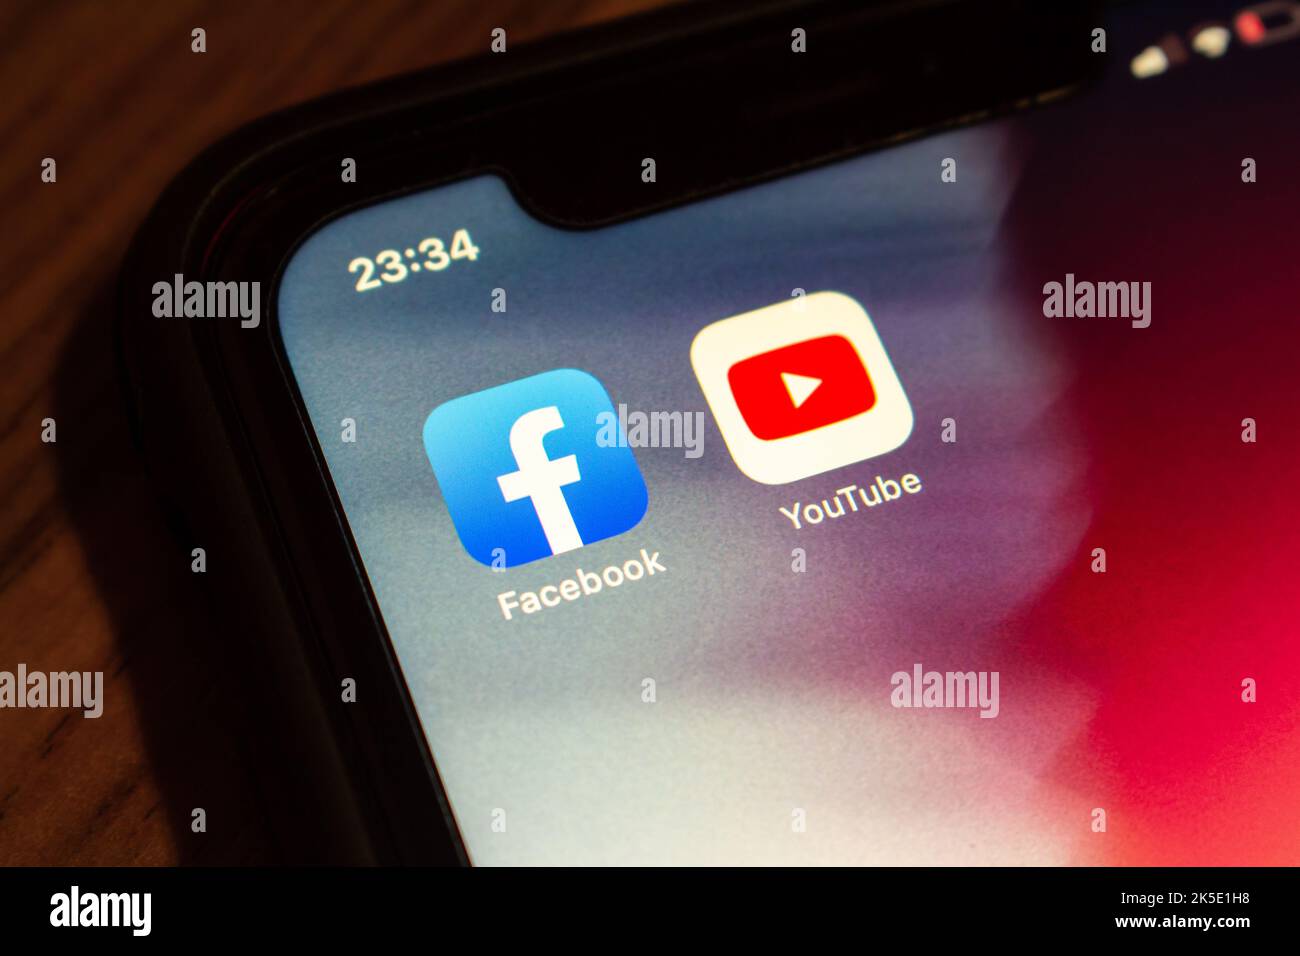 Vancouver, CANADA - Oct 6 2022 : Facebook and YouTube icons on an iPhone screen on wooden table. Stock Photo